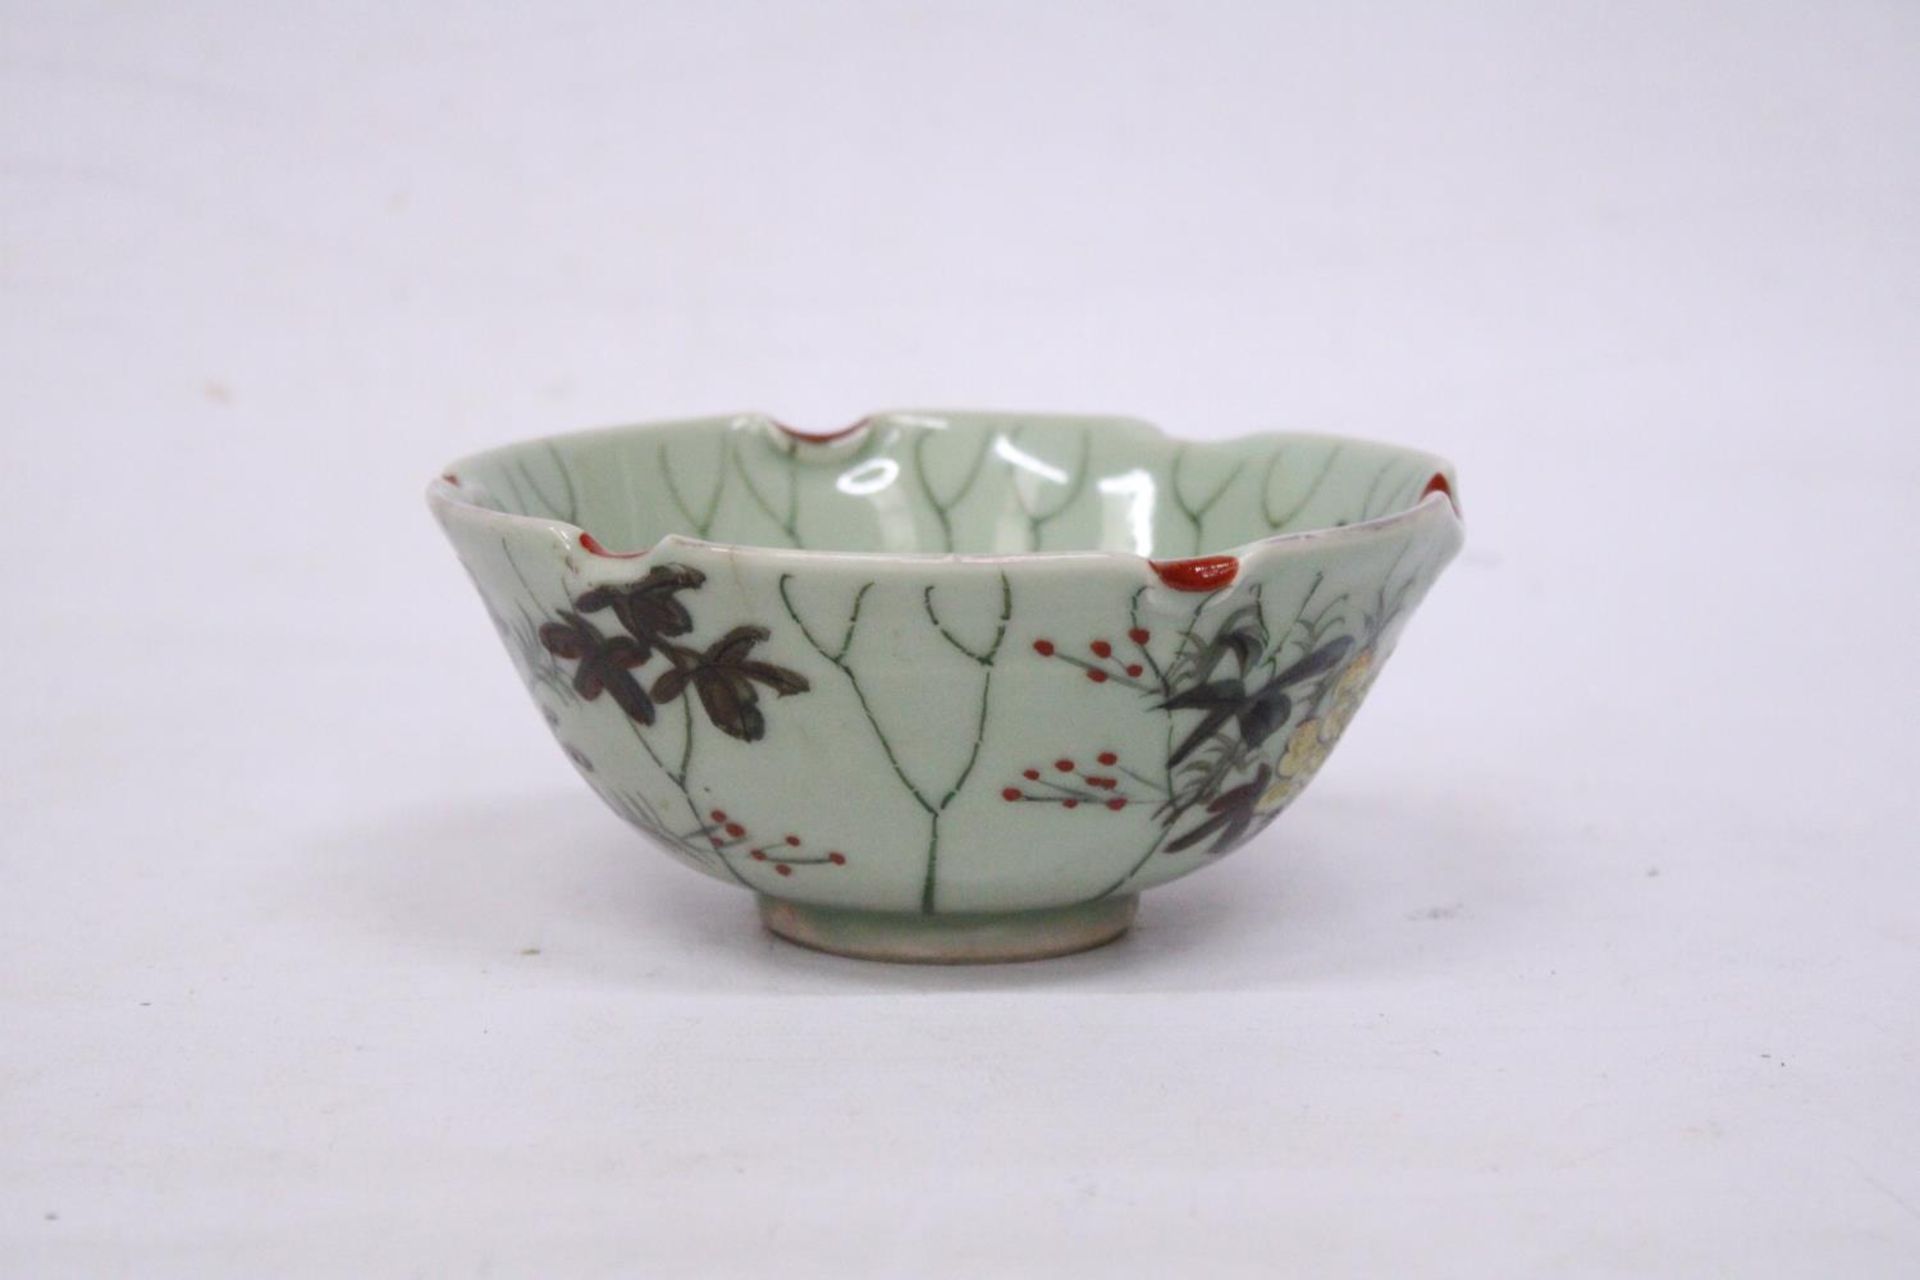 A CHINESE PORCELAIN GLAZED FOOTED BOWL WITH FLORAL DECORATION - Image 3 of 7